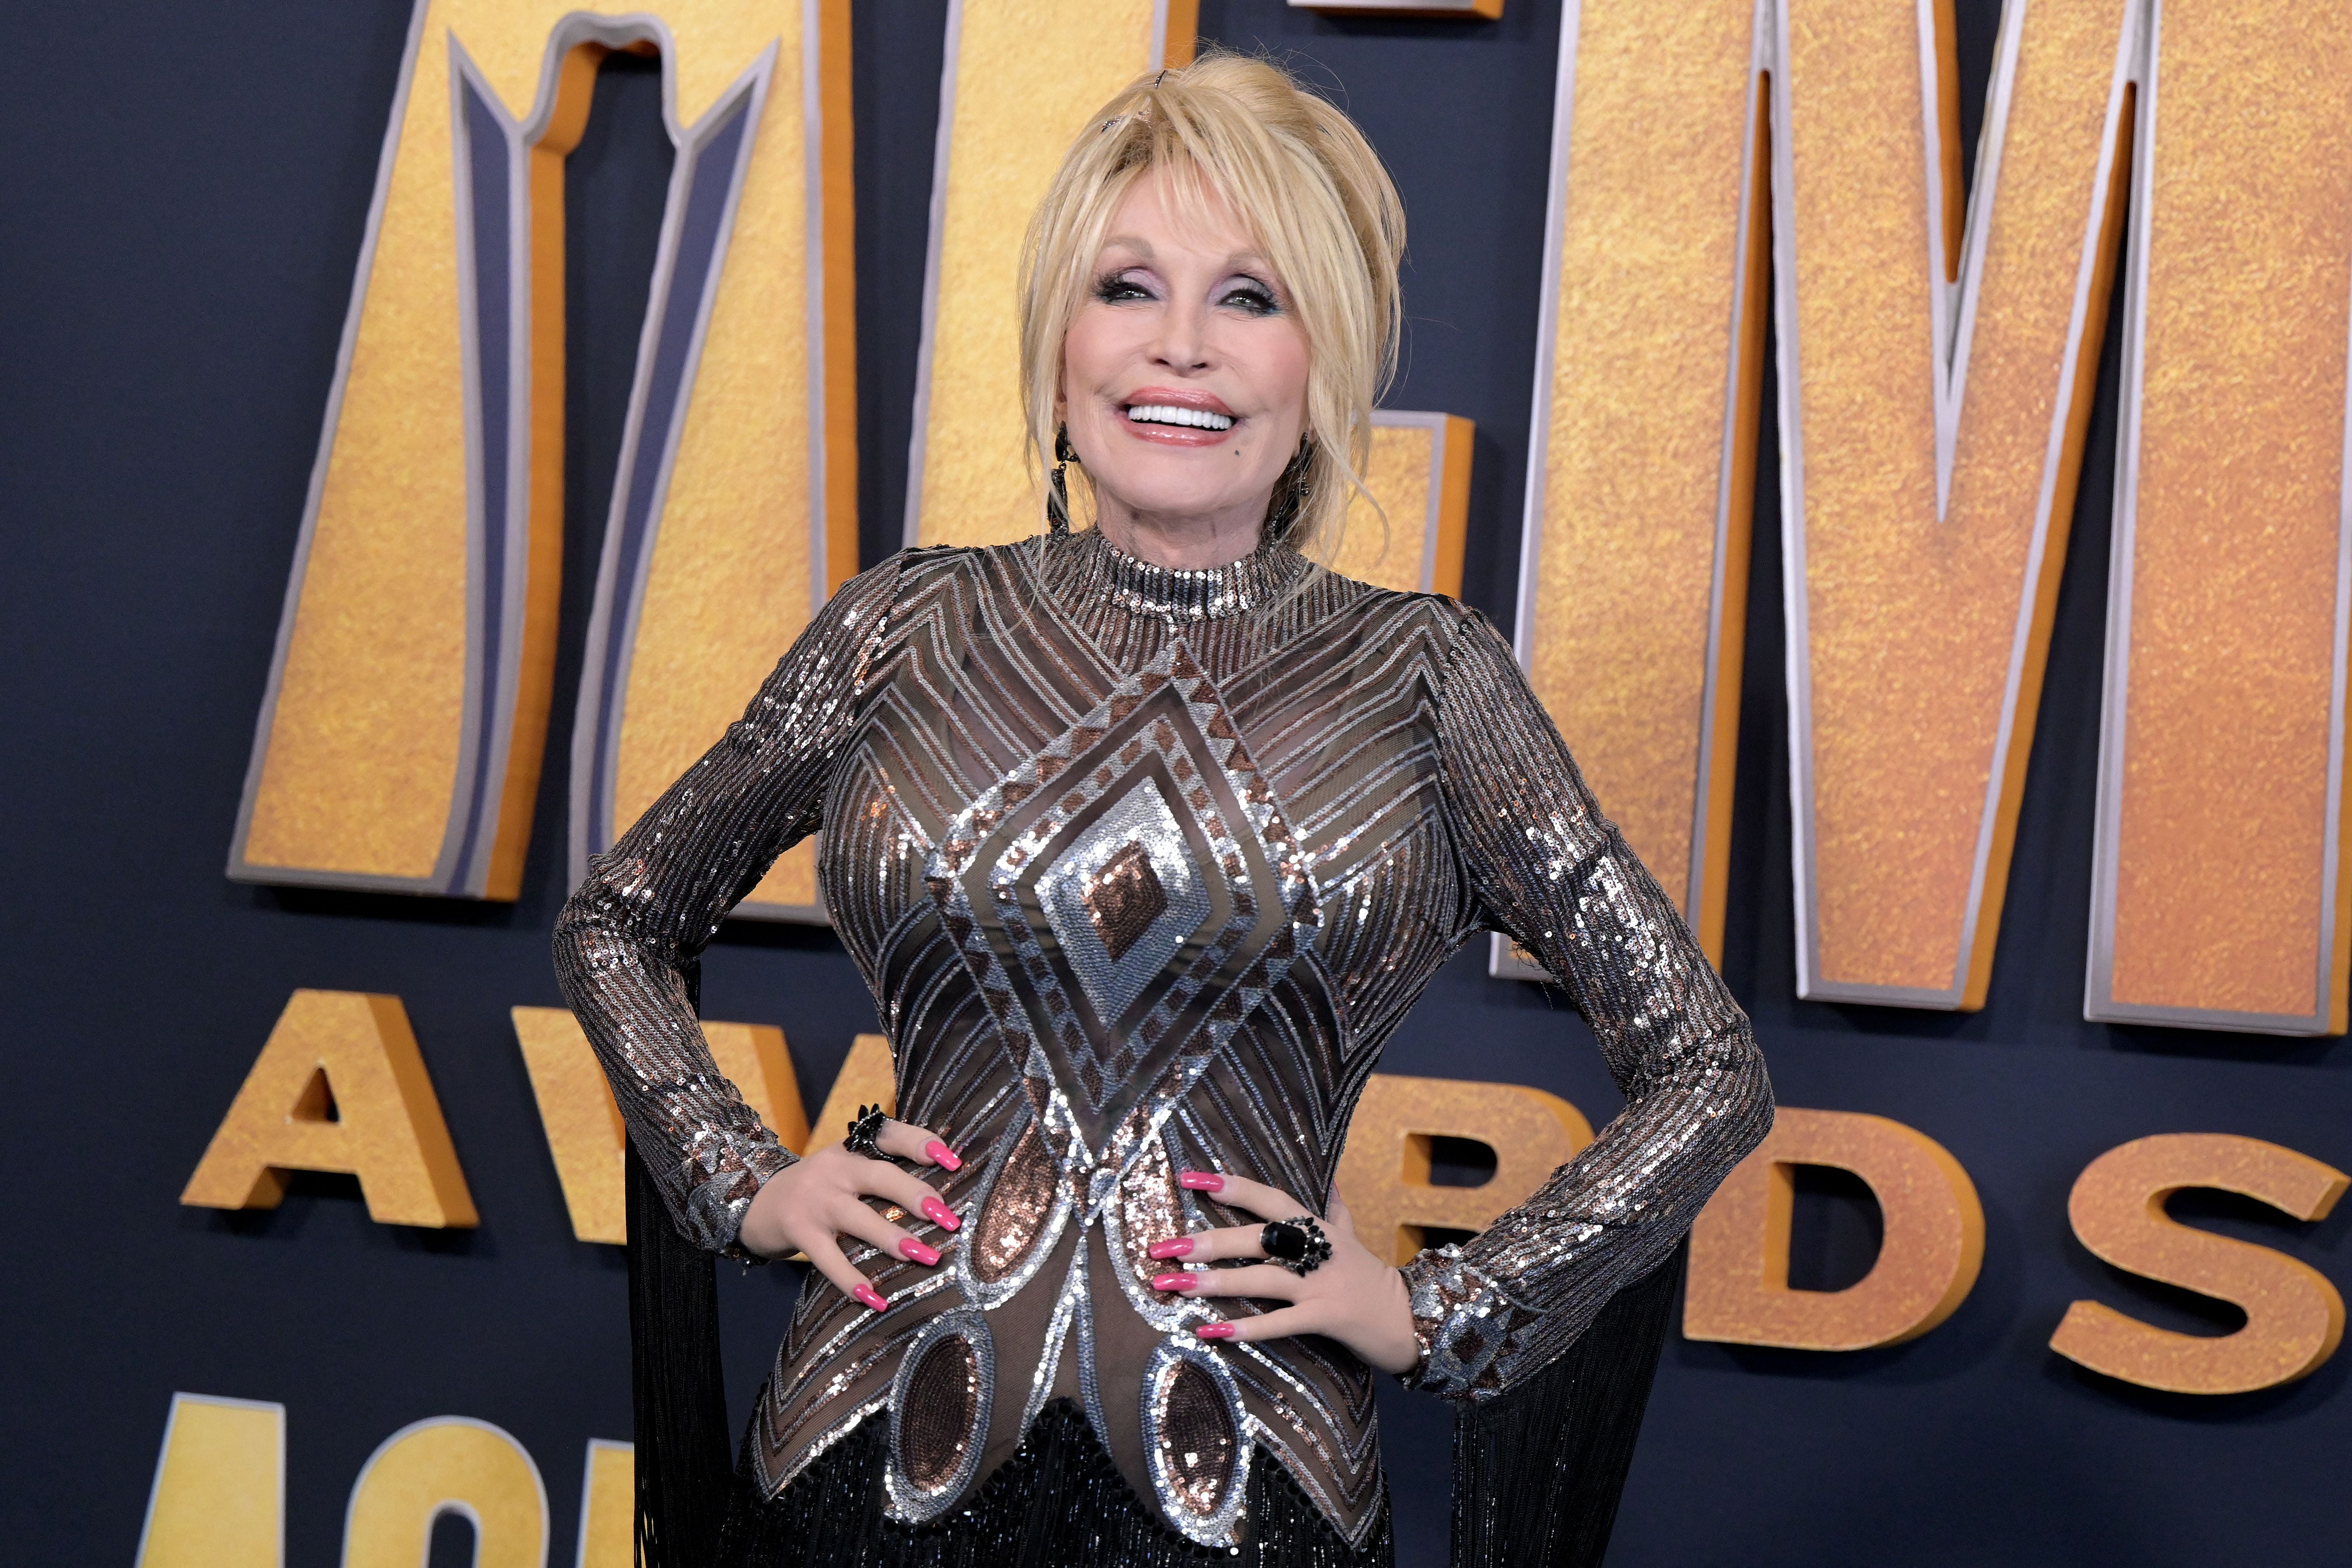 Dolly Parton credits her fabulous skin to saying out of the sun